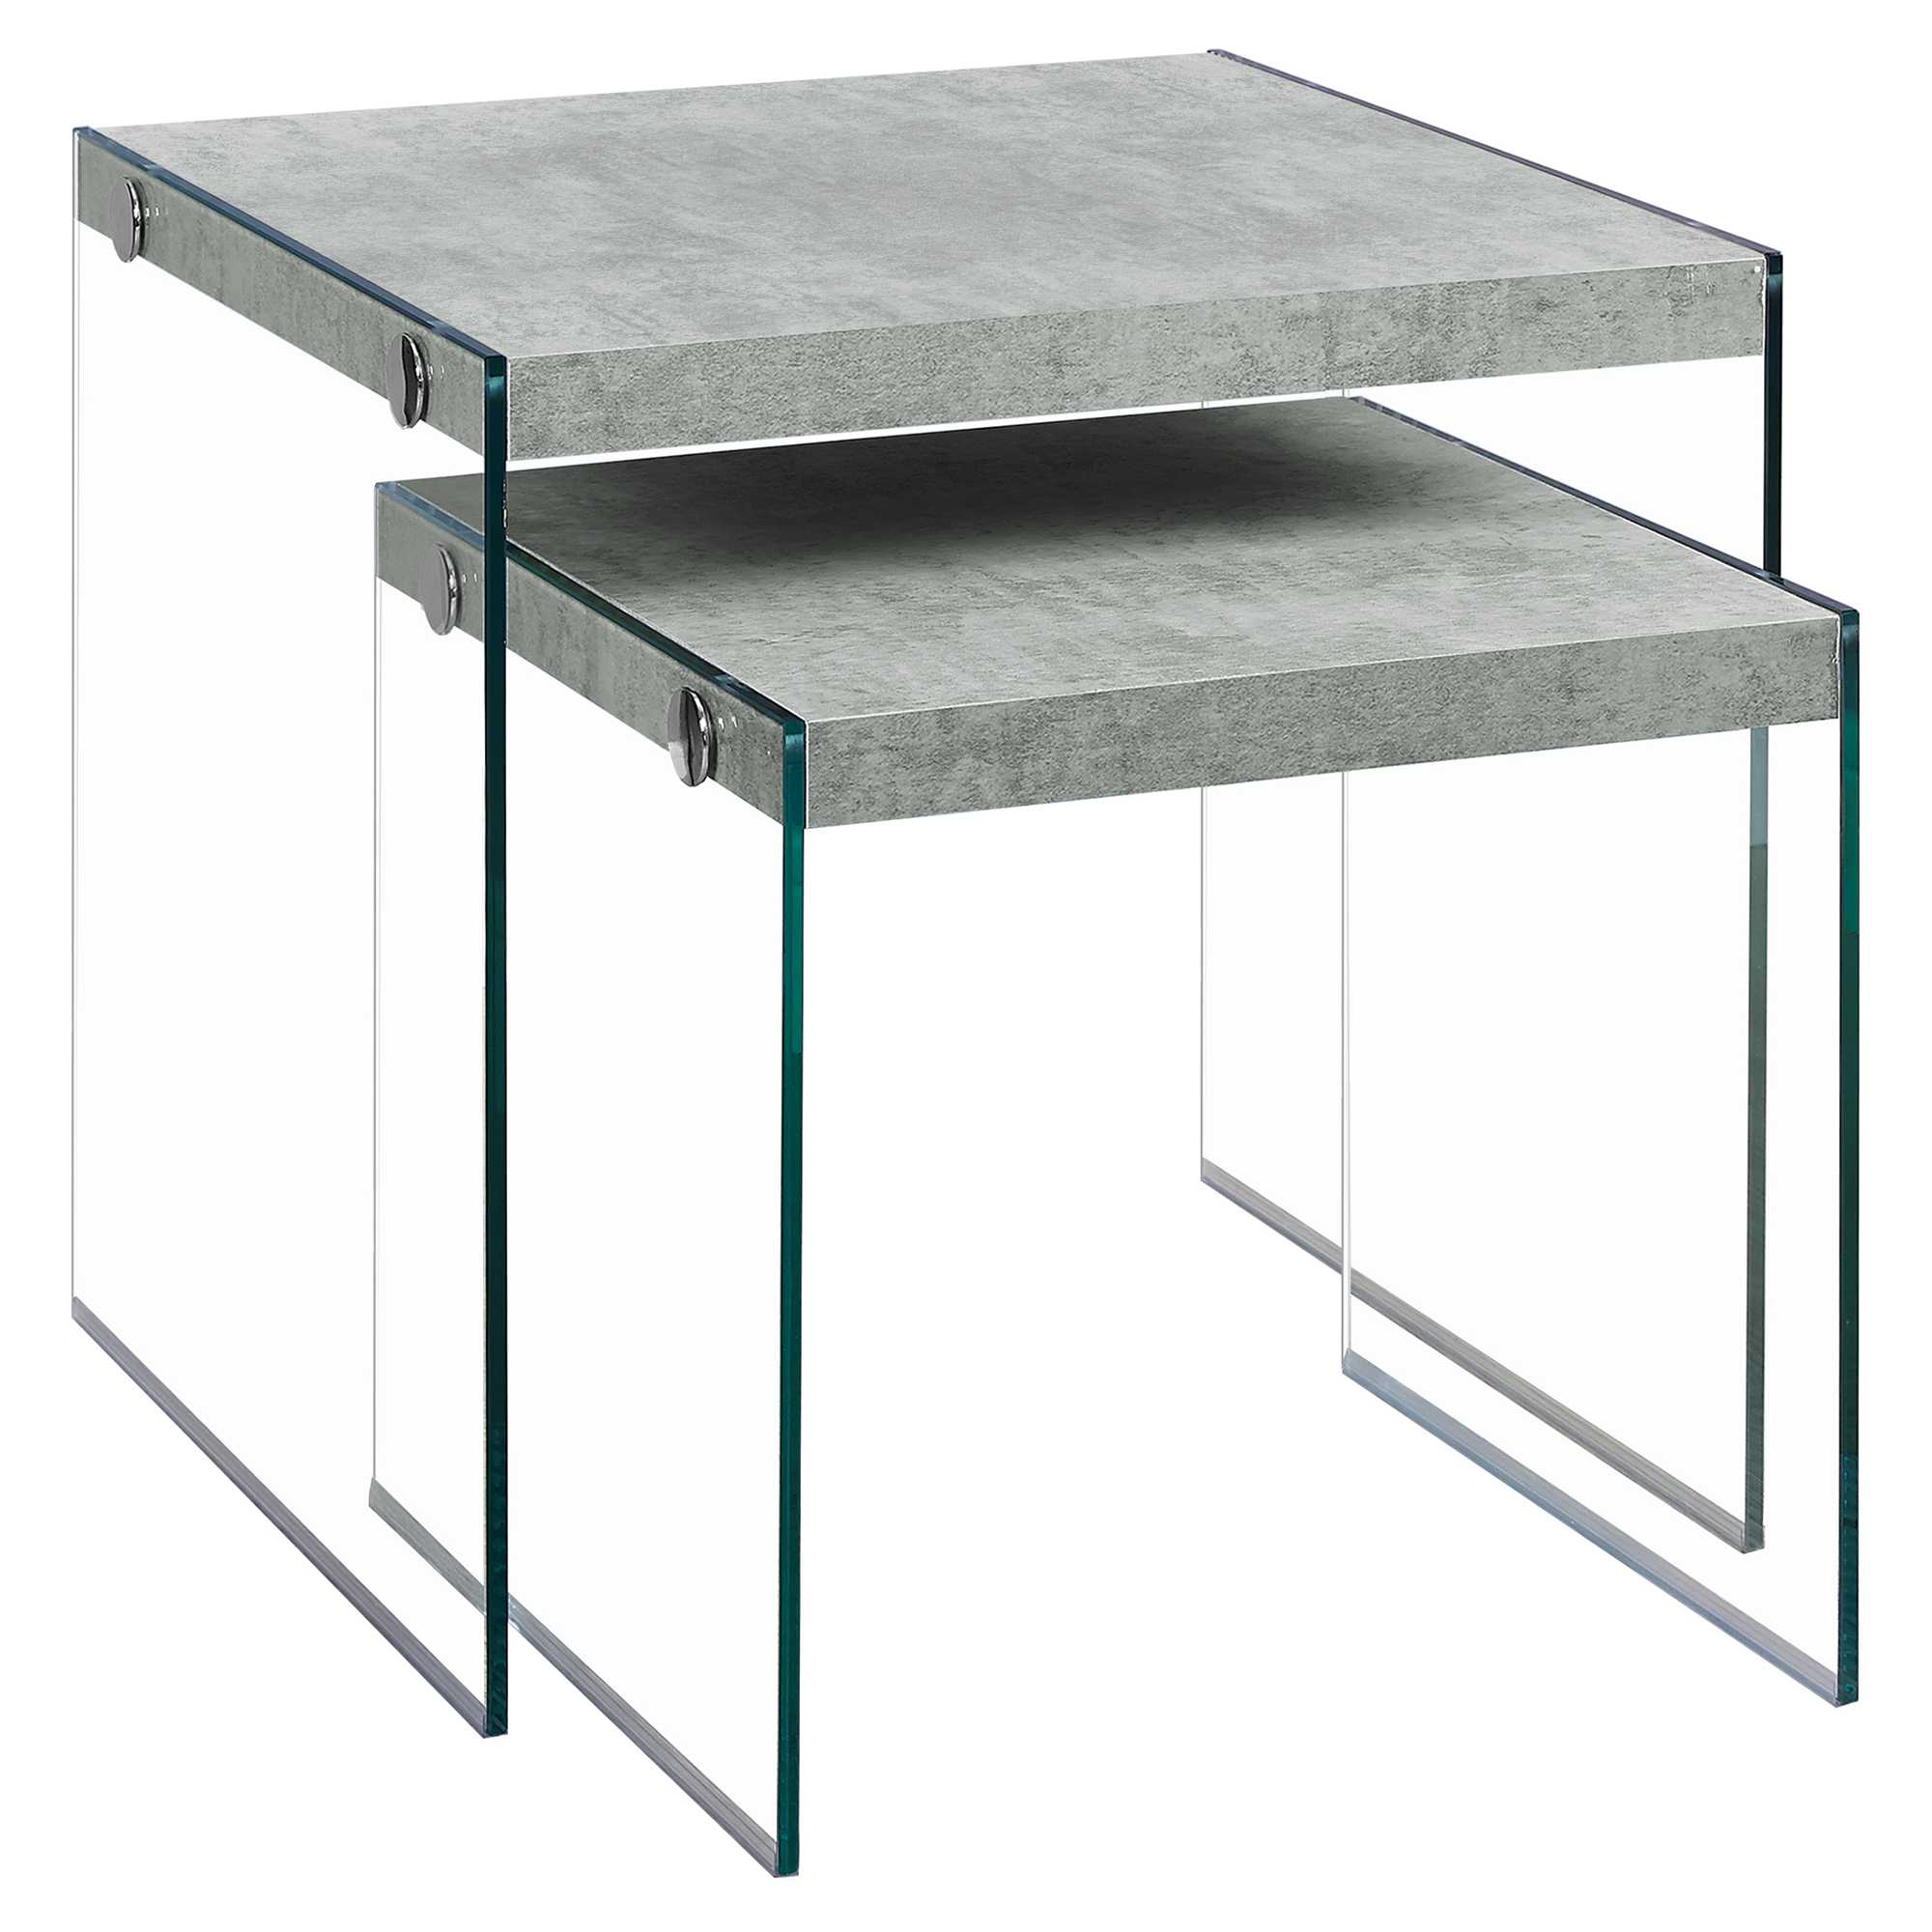 35.5" x 35.5" x 35.5" Grey Clear Particle Board Tempered Glass 2pcs Nesting Table Set